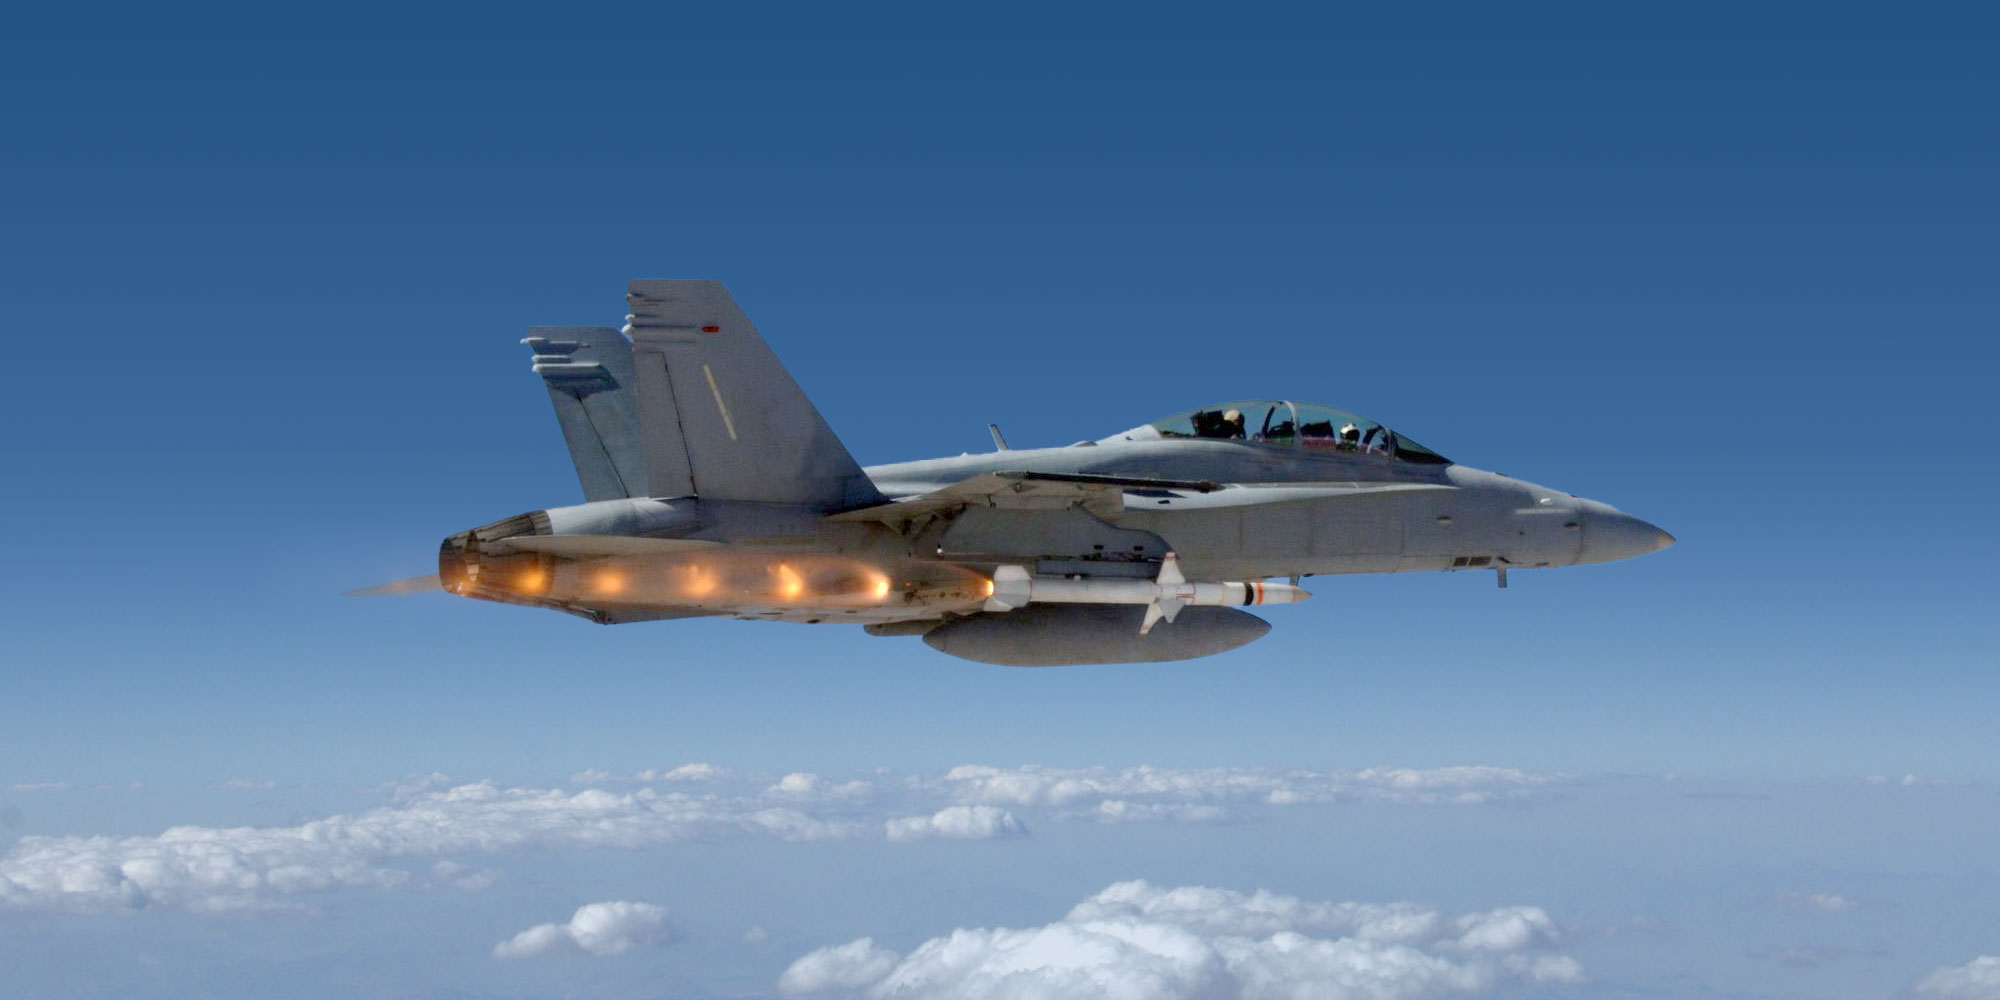 Fighter jet shooting Advanced Anti-Radiation Guided Missile AARGM above blue skies